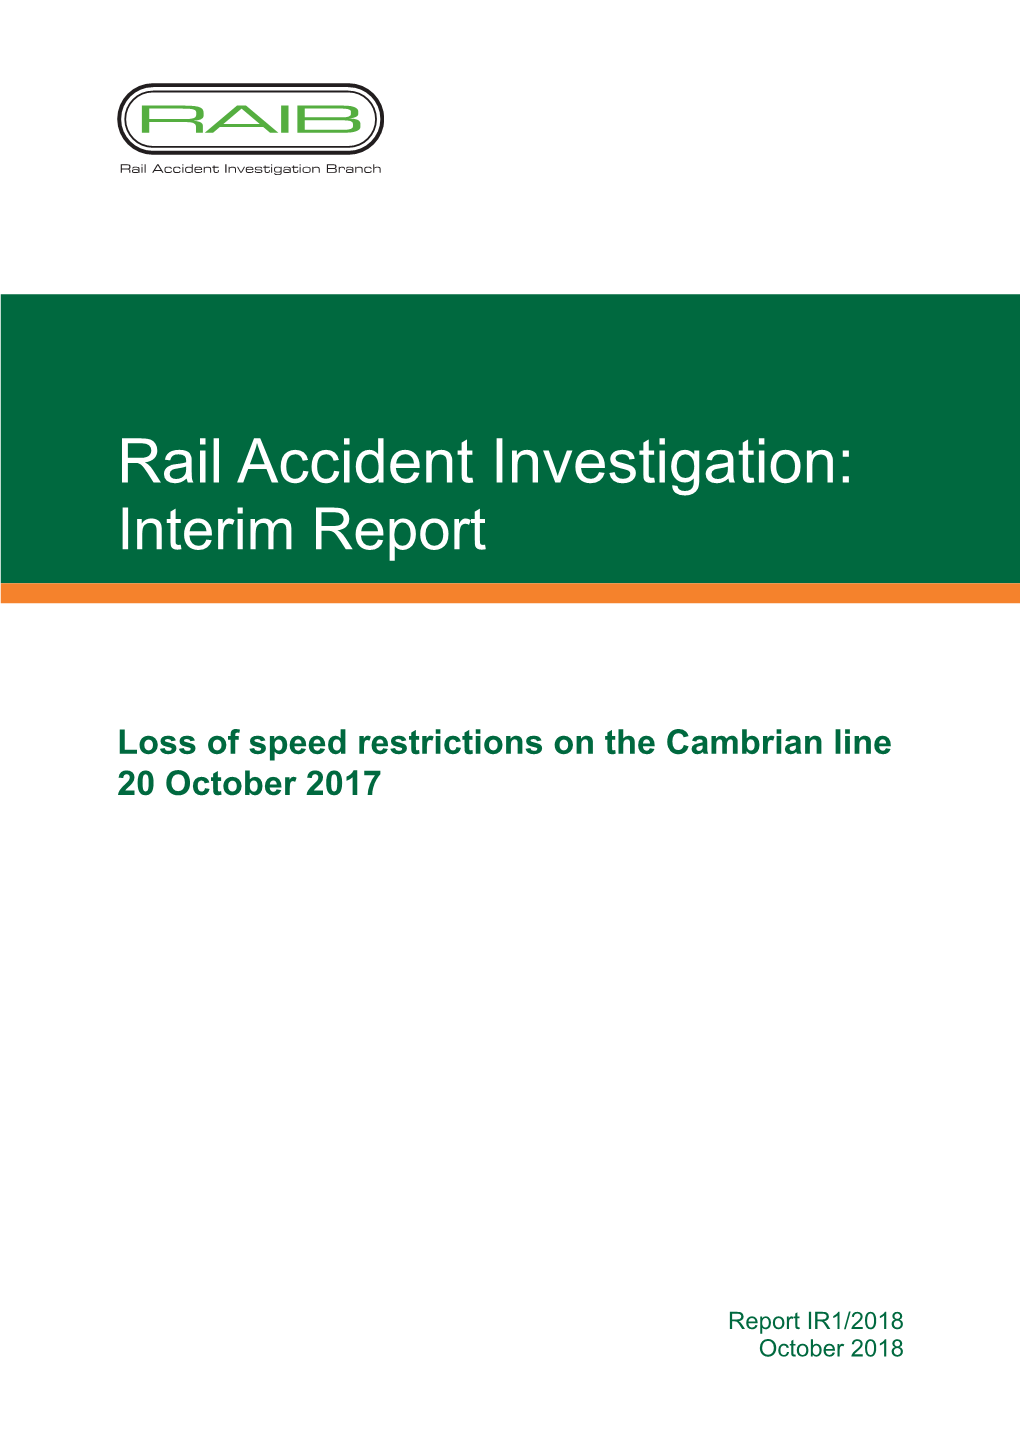 Loss of Speed Restrictions on the Cambrian Line 20 October 2017